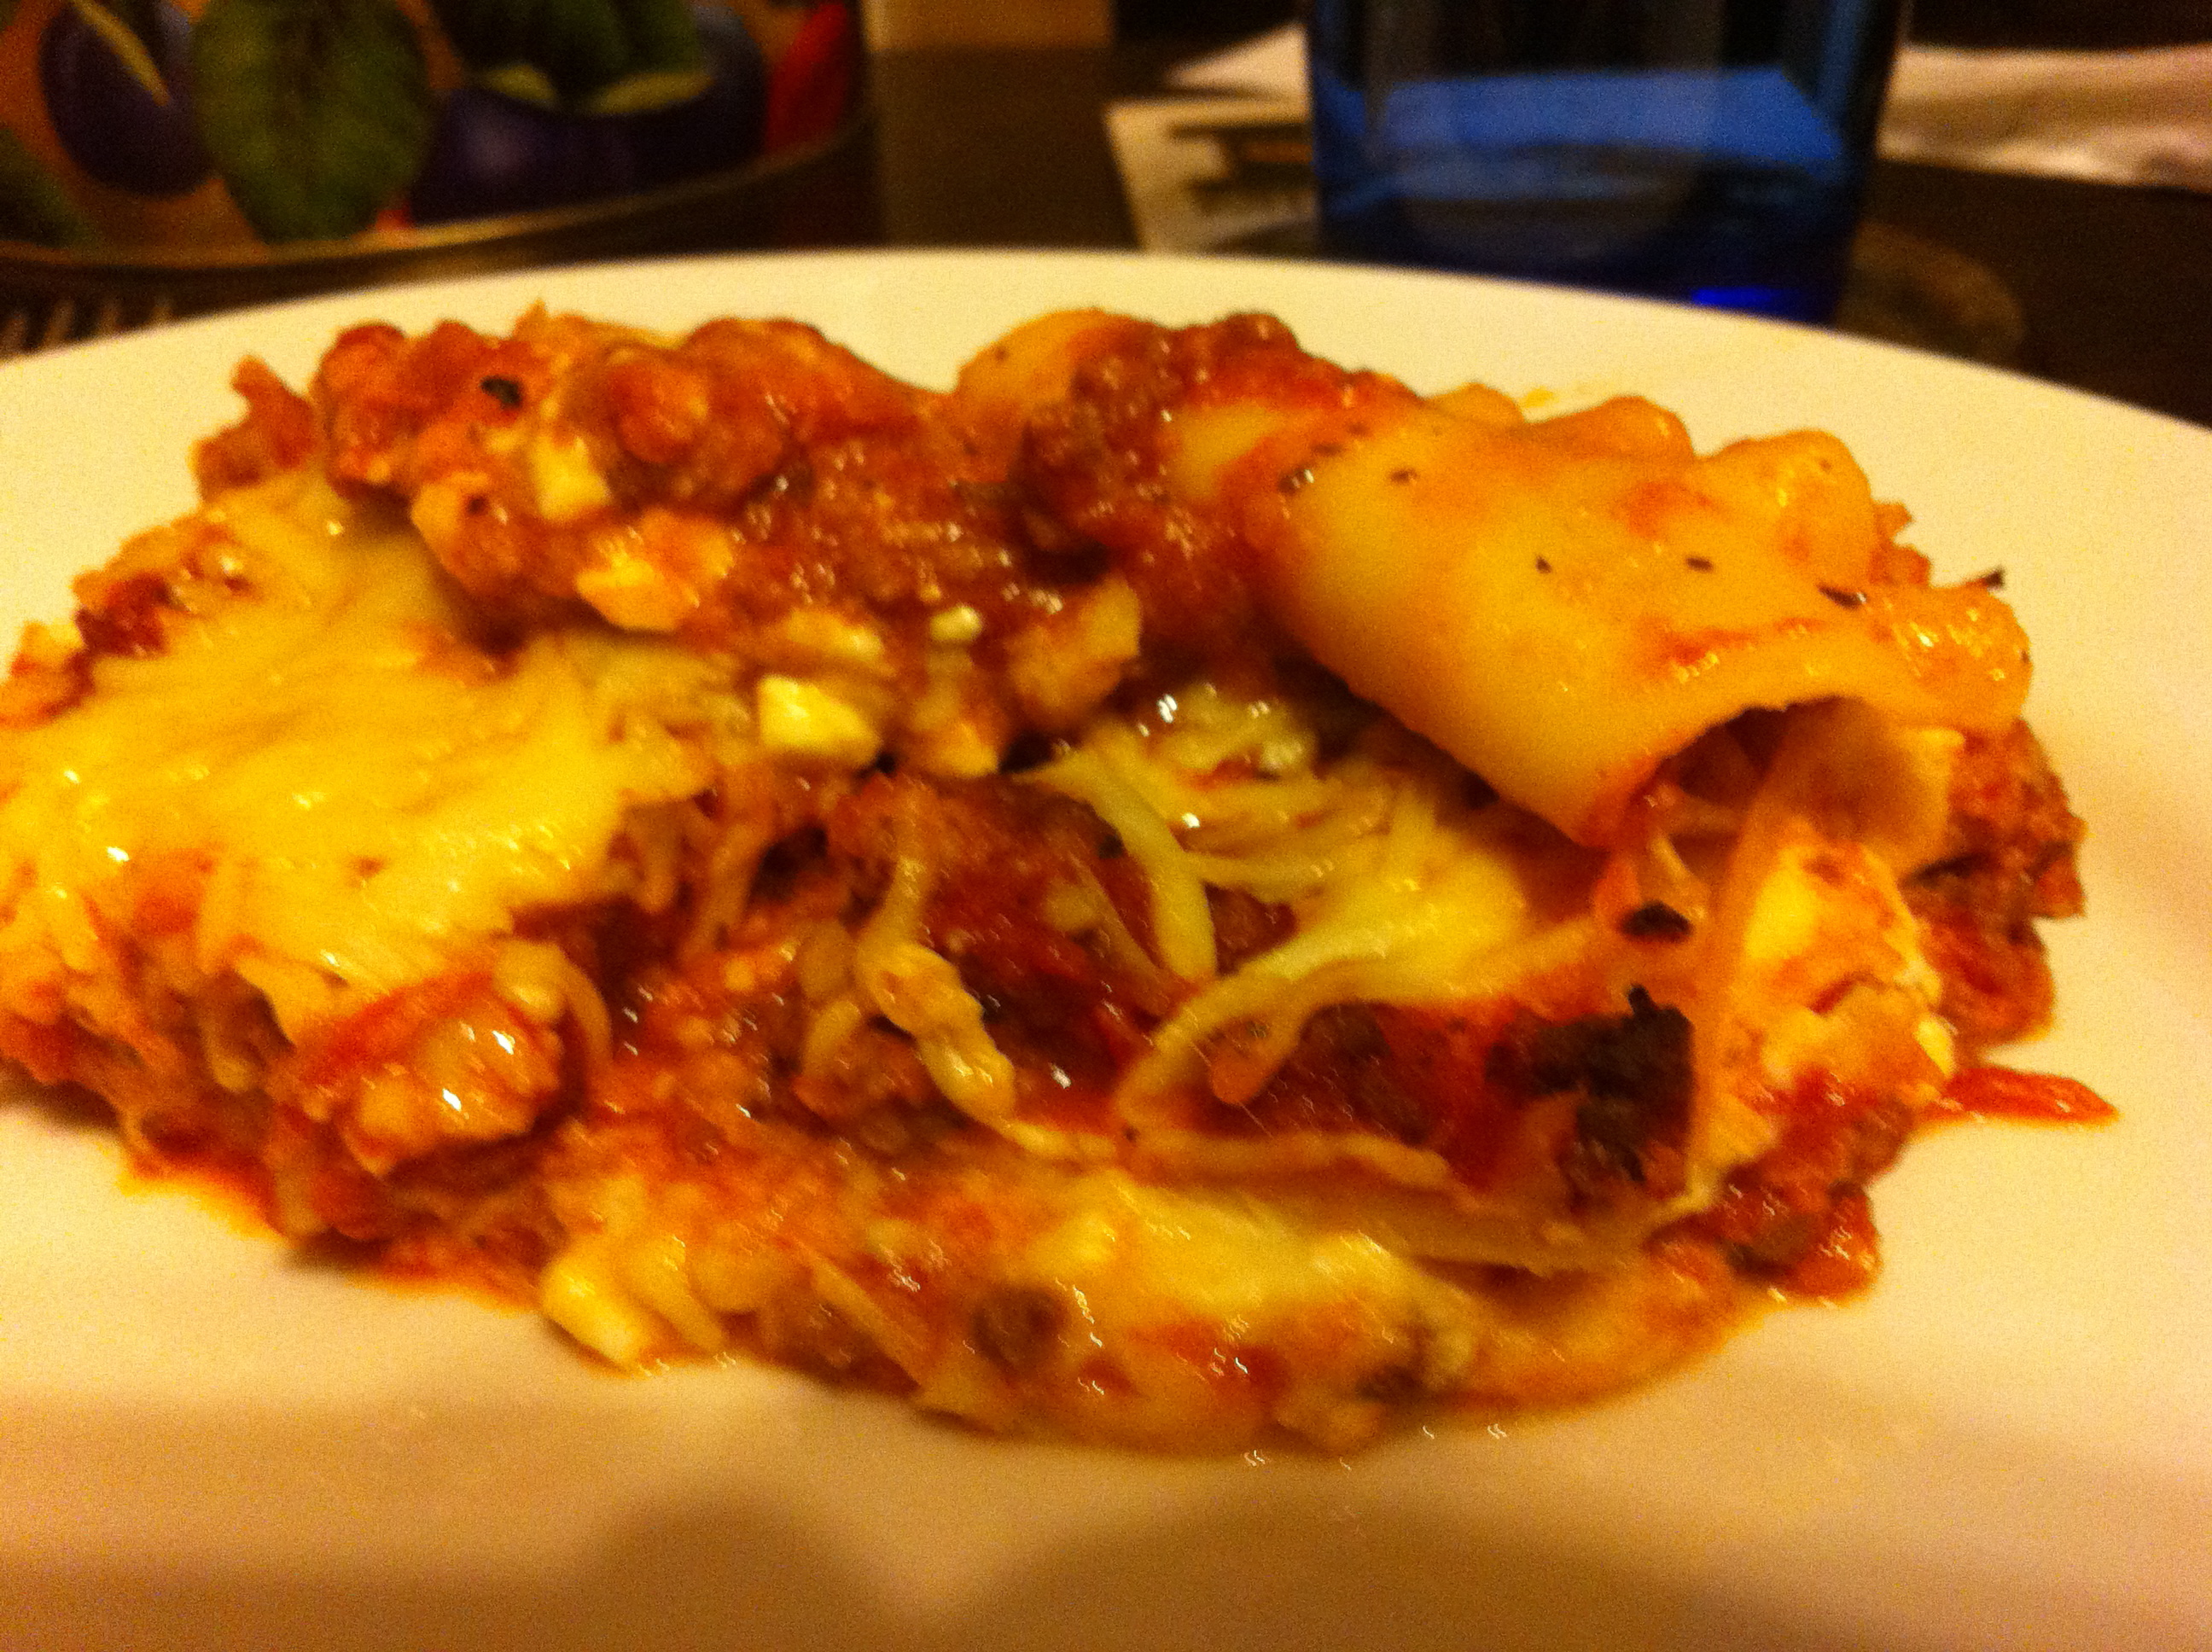 Homemade Lasagna with meat sauce by Dispatches from the Castle